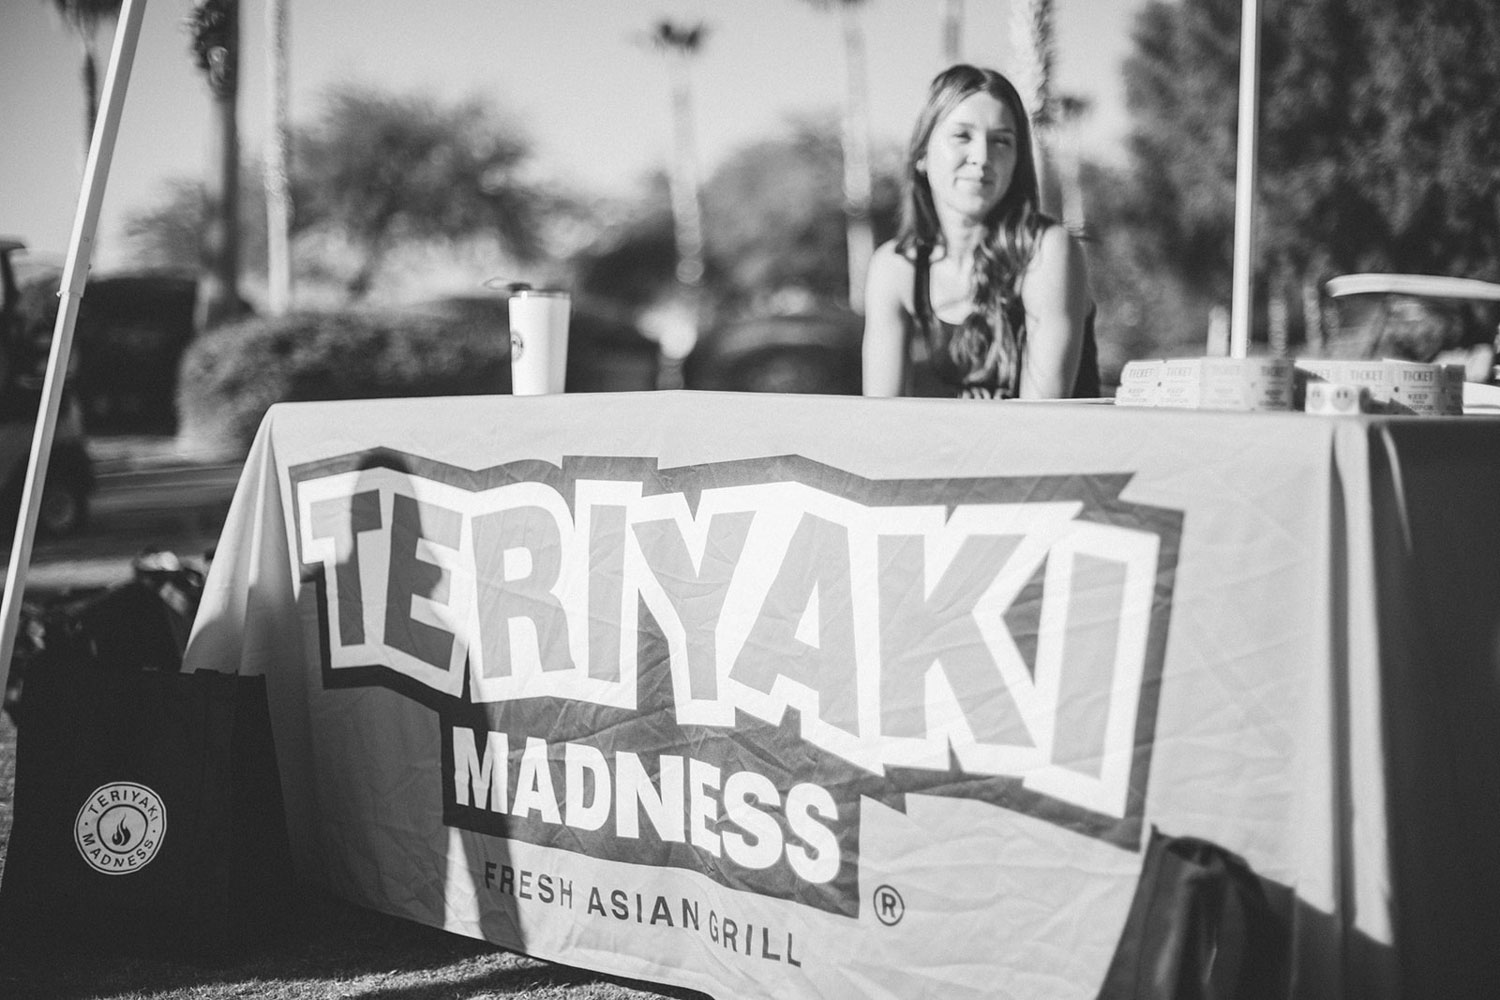 Teriyaki Madness Fresh Asian Grill booth with lady sitting behind the table in black and white